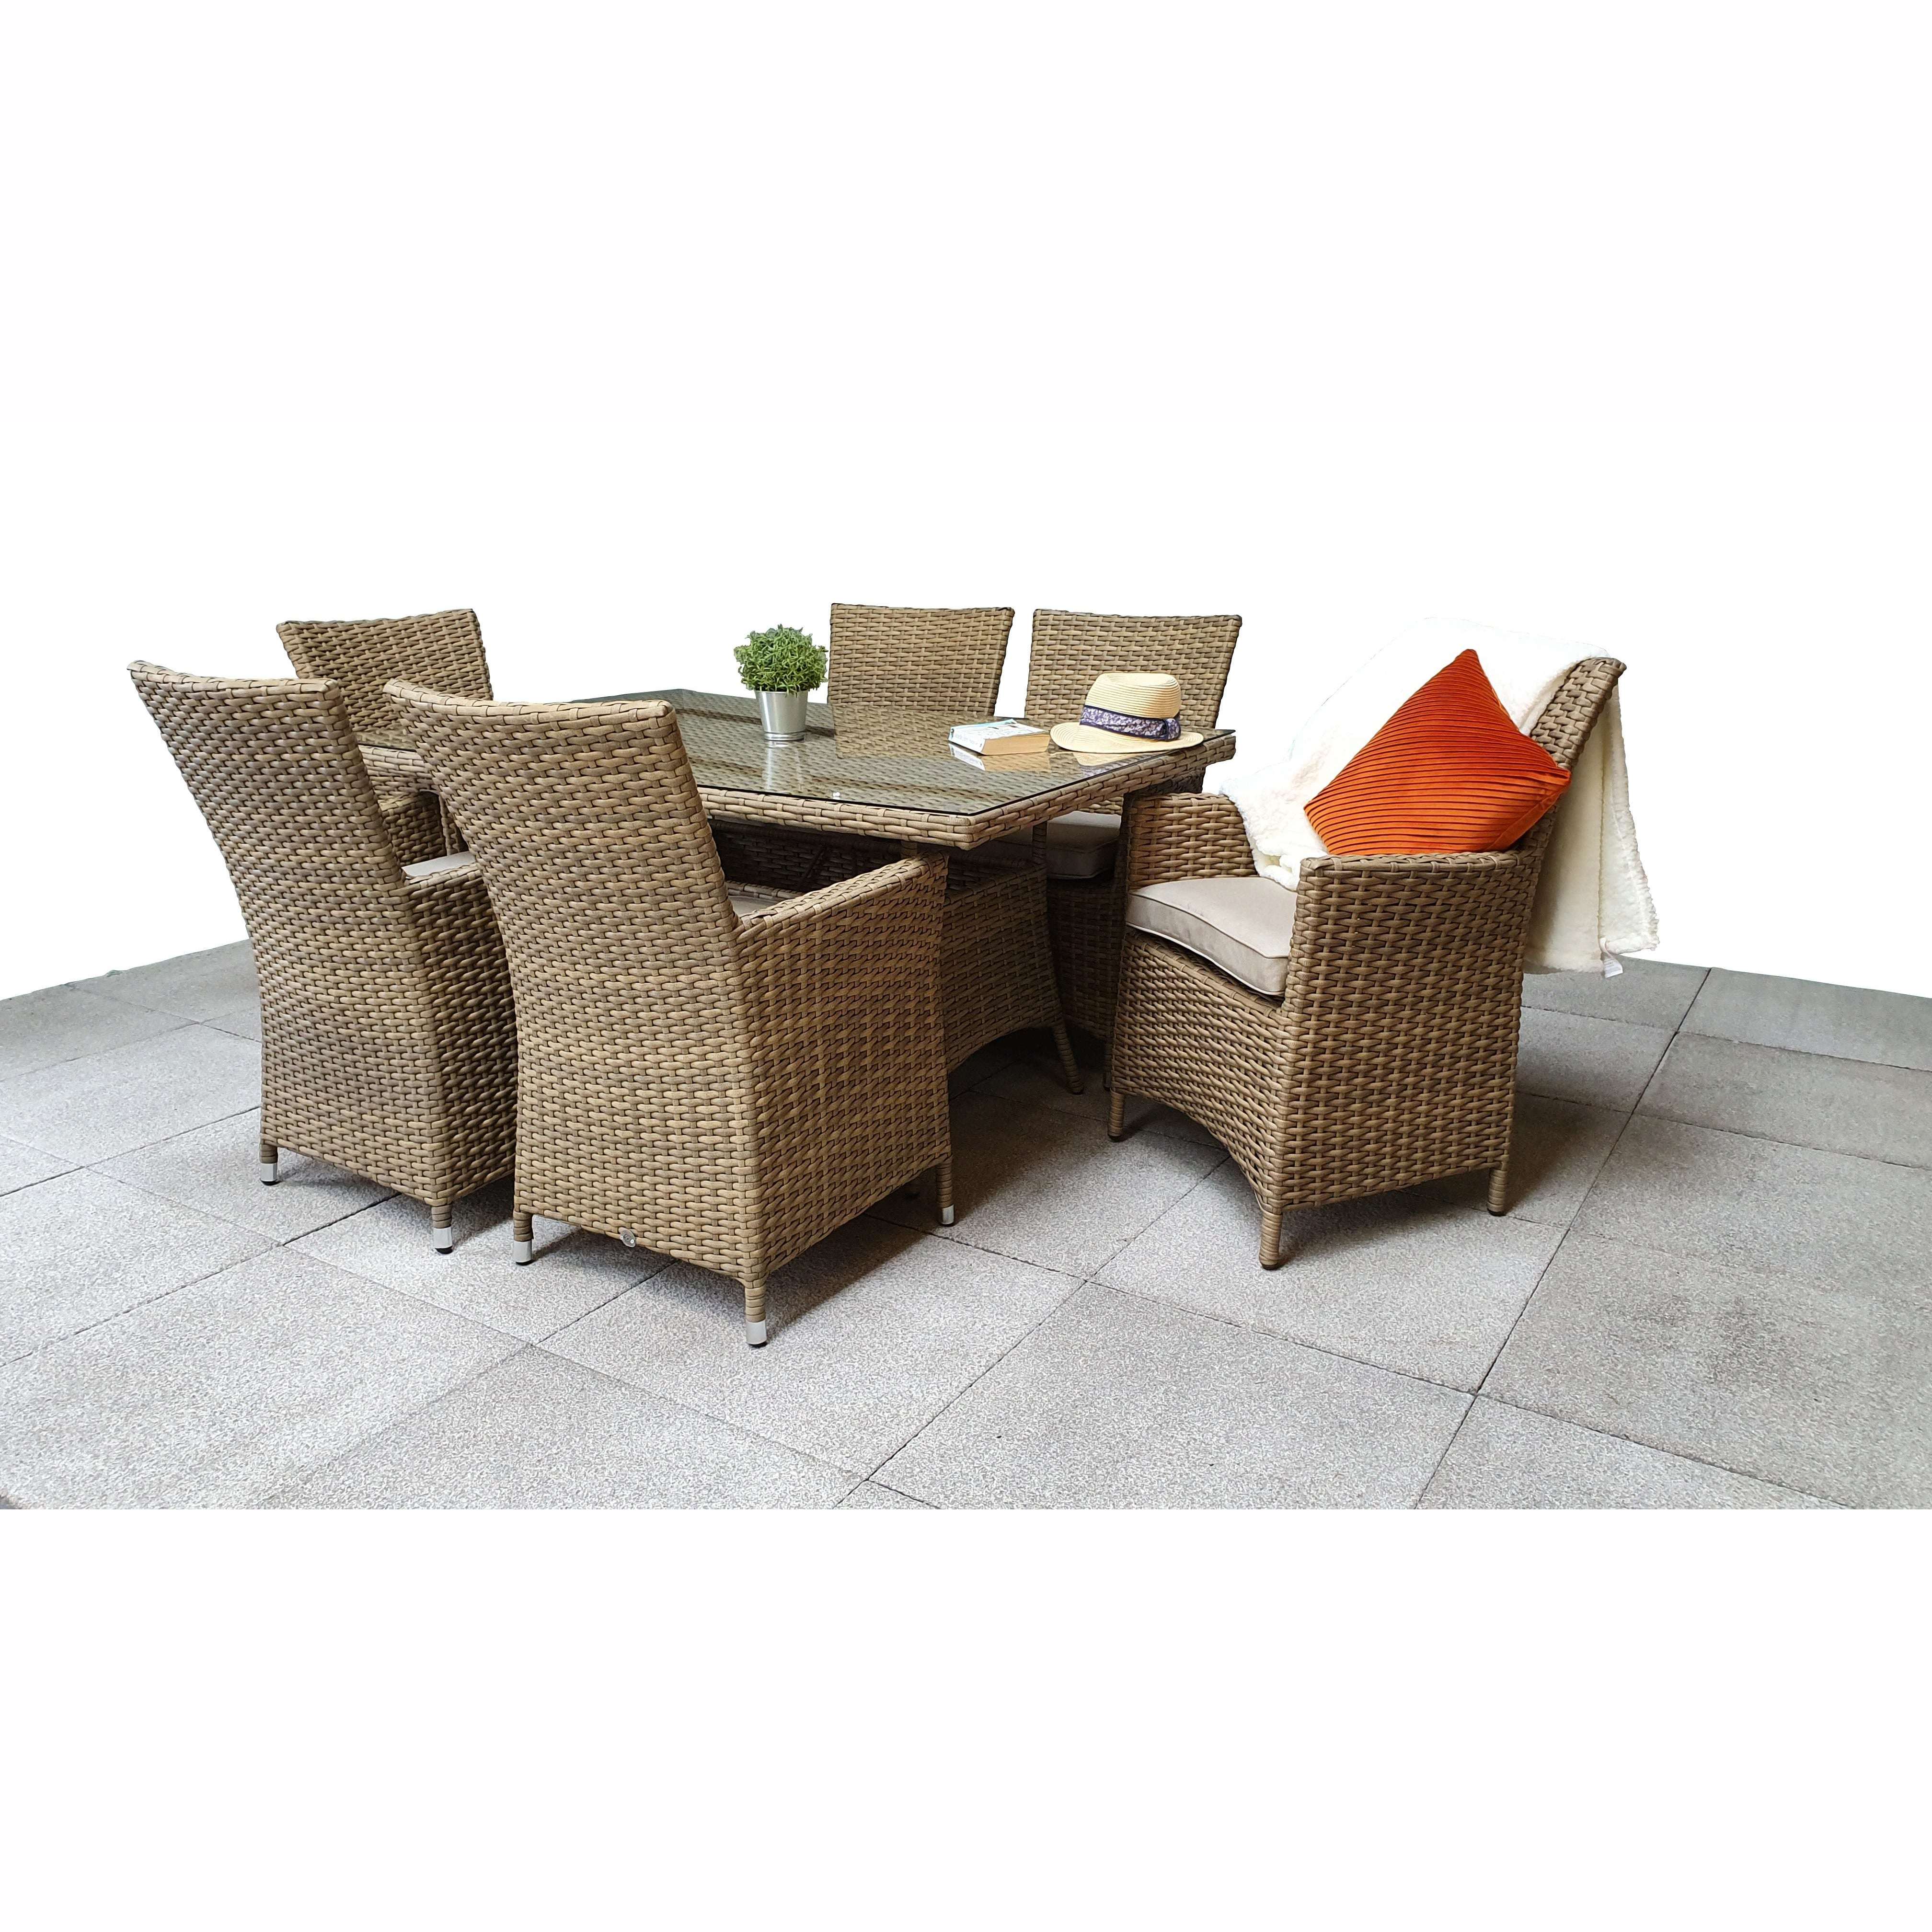 Exceptional Garden:Signature Weave Darcey 6-Seater Dining Set with Rectangular Table and High Back Chairs